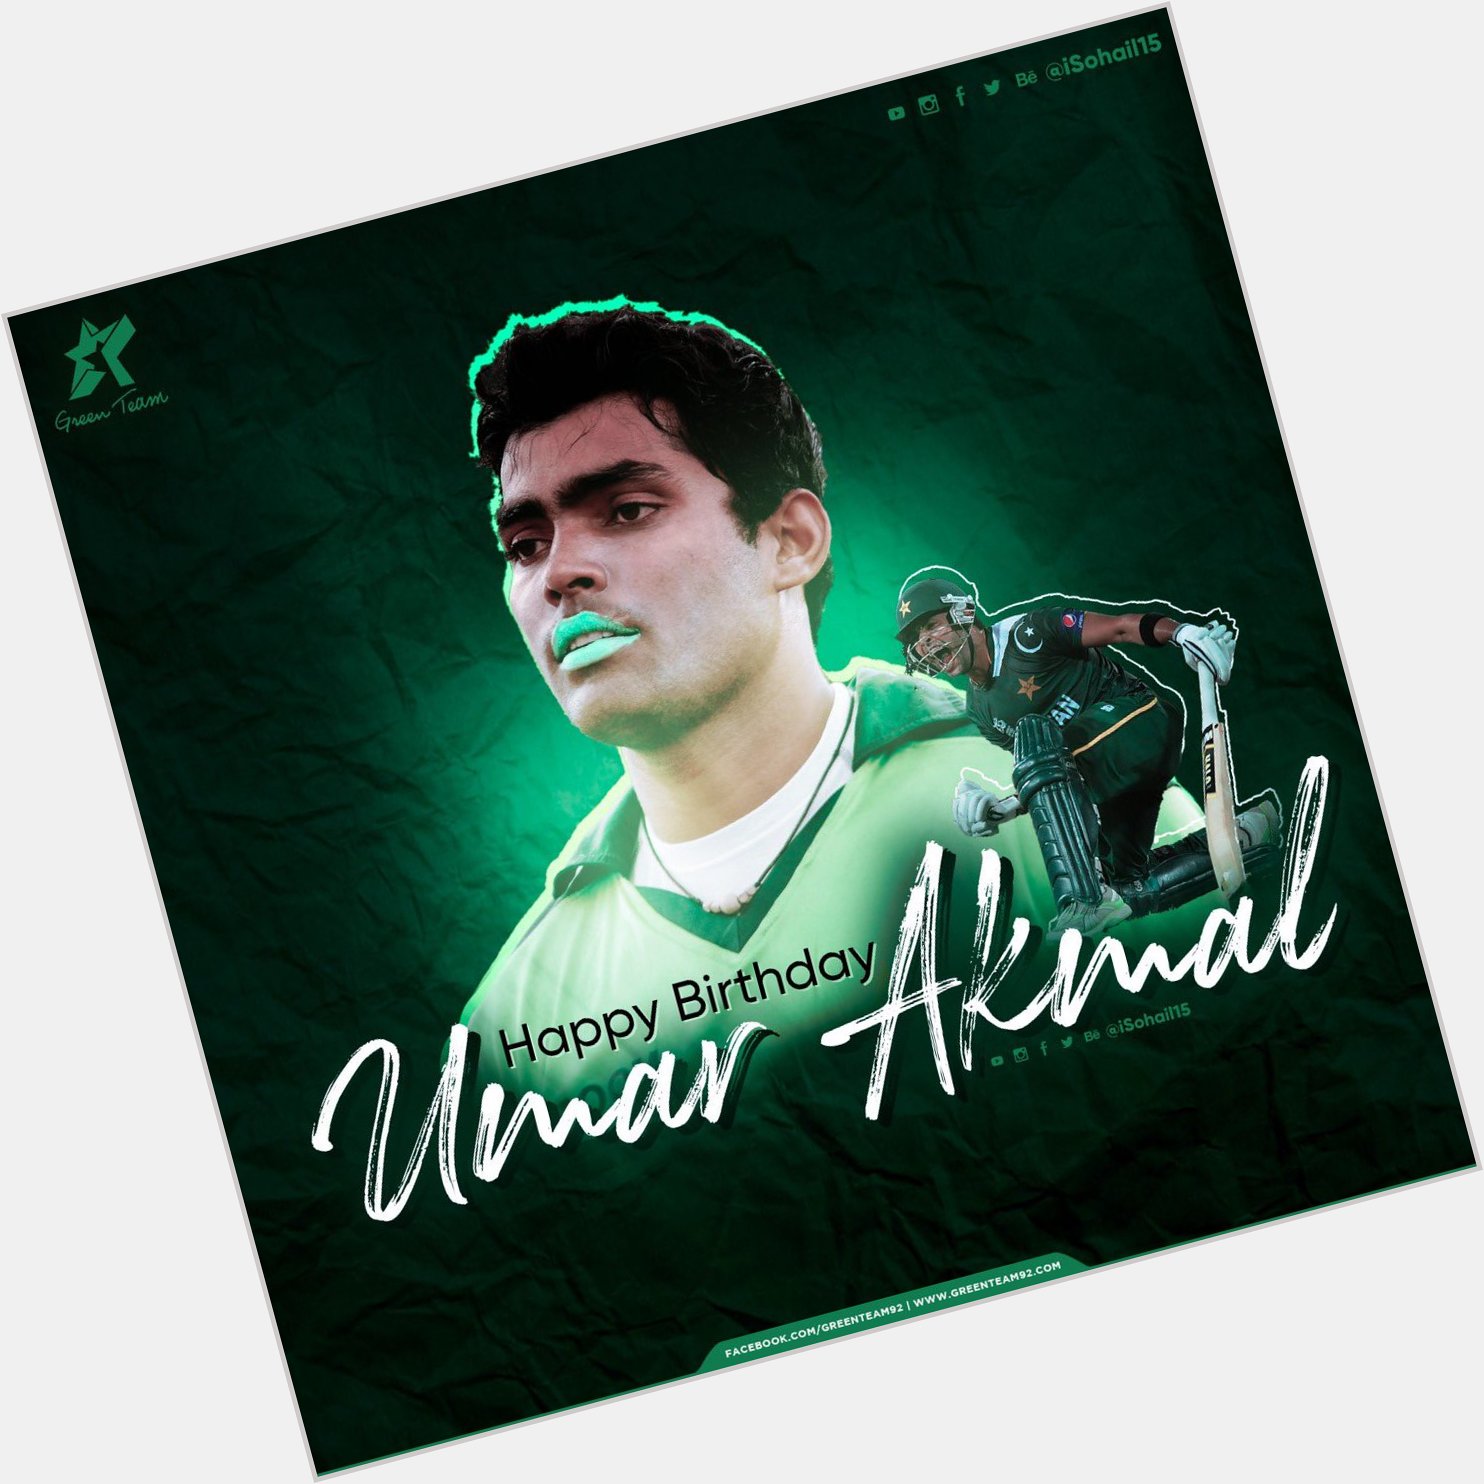 Happy Birthday Umar Akmal, he played 16 Test, 121 ODIs and 84 T20Is for Pakistan! 